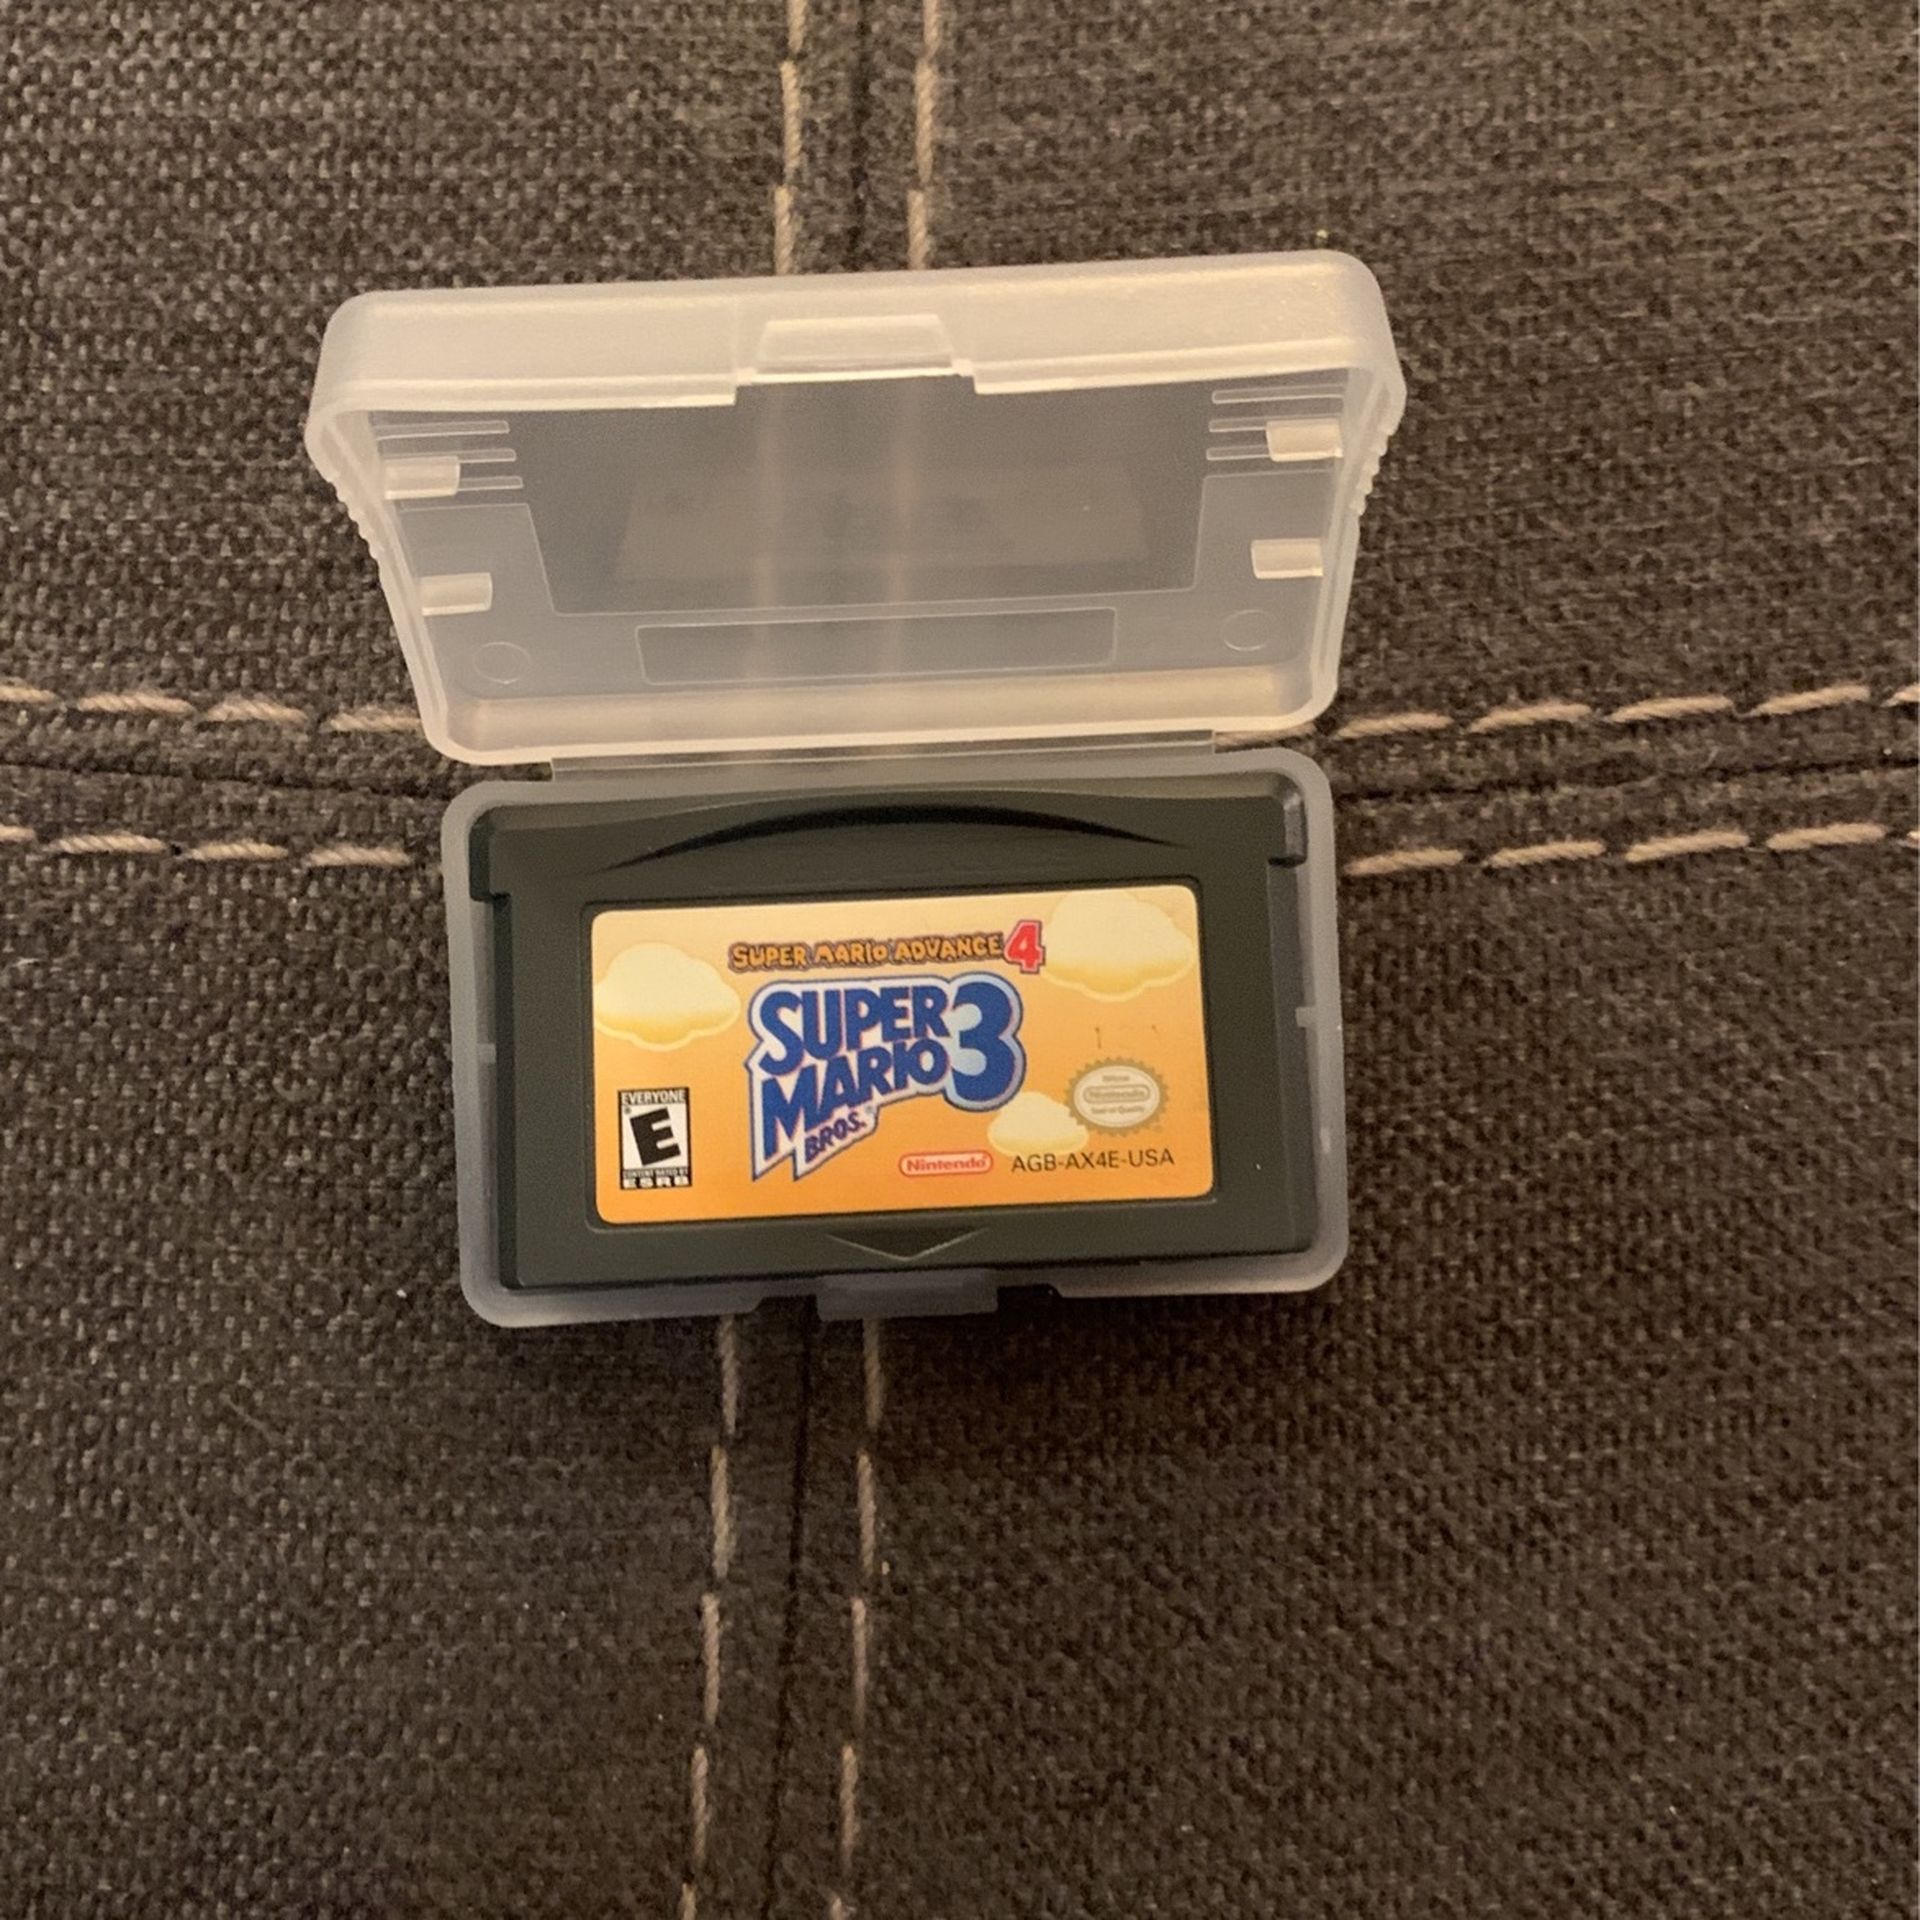 Sure Mario 3 For Gameboy Advance